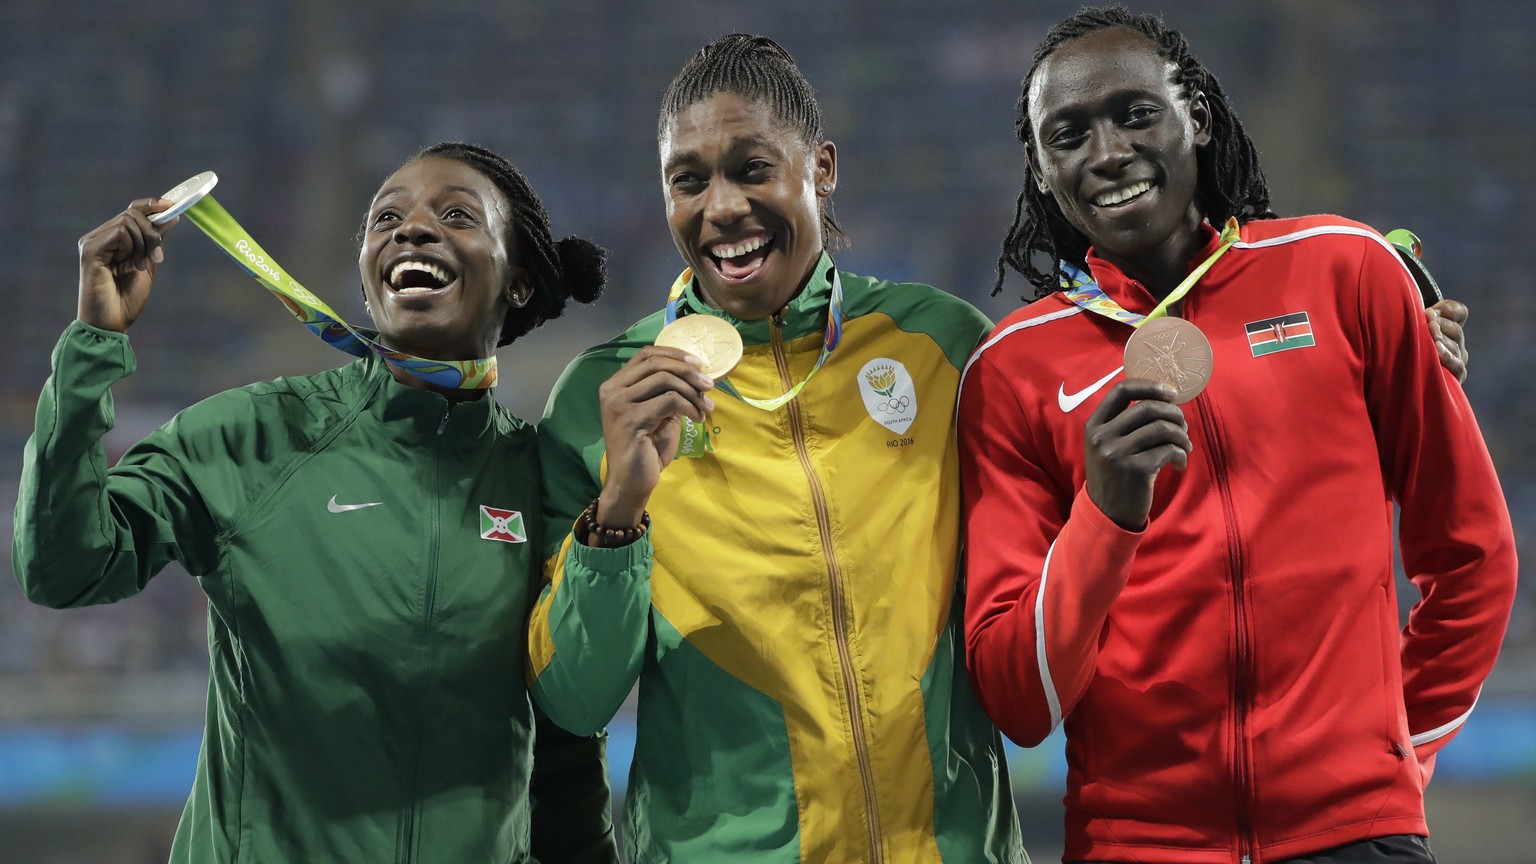 Medalist in the women&#039;s 800 meters, from left, Burundi&#039;s Francine Niyonsaba, silver, South Africa&#039;s Caster Semenya, gold, and Kenya&#039;s Margaret Wambui, bronze, hold their medals dur ...